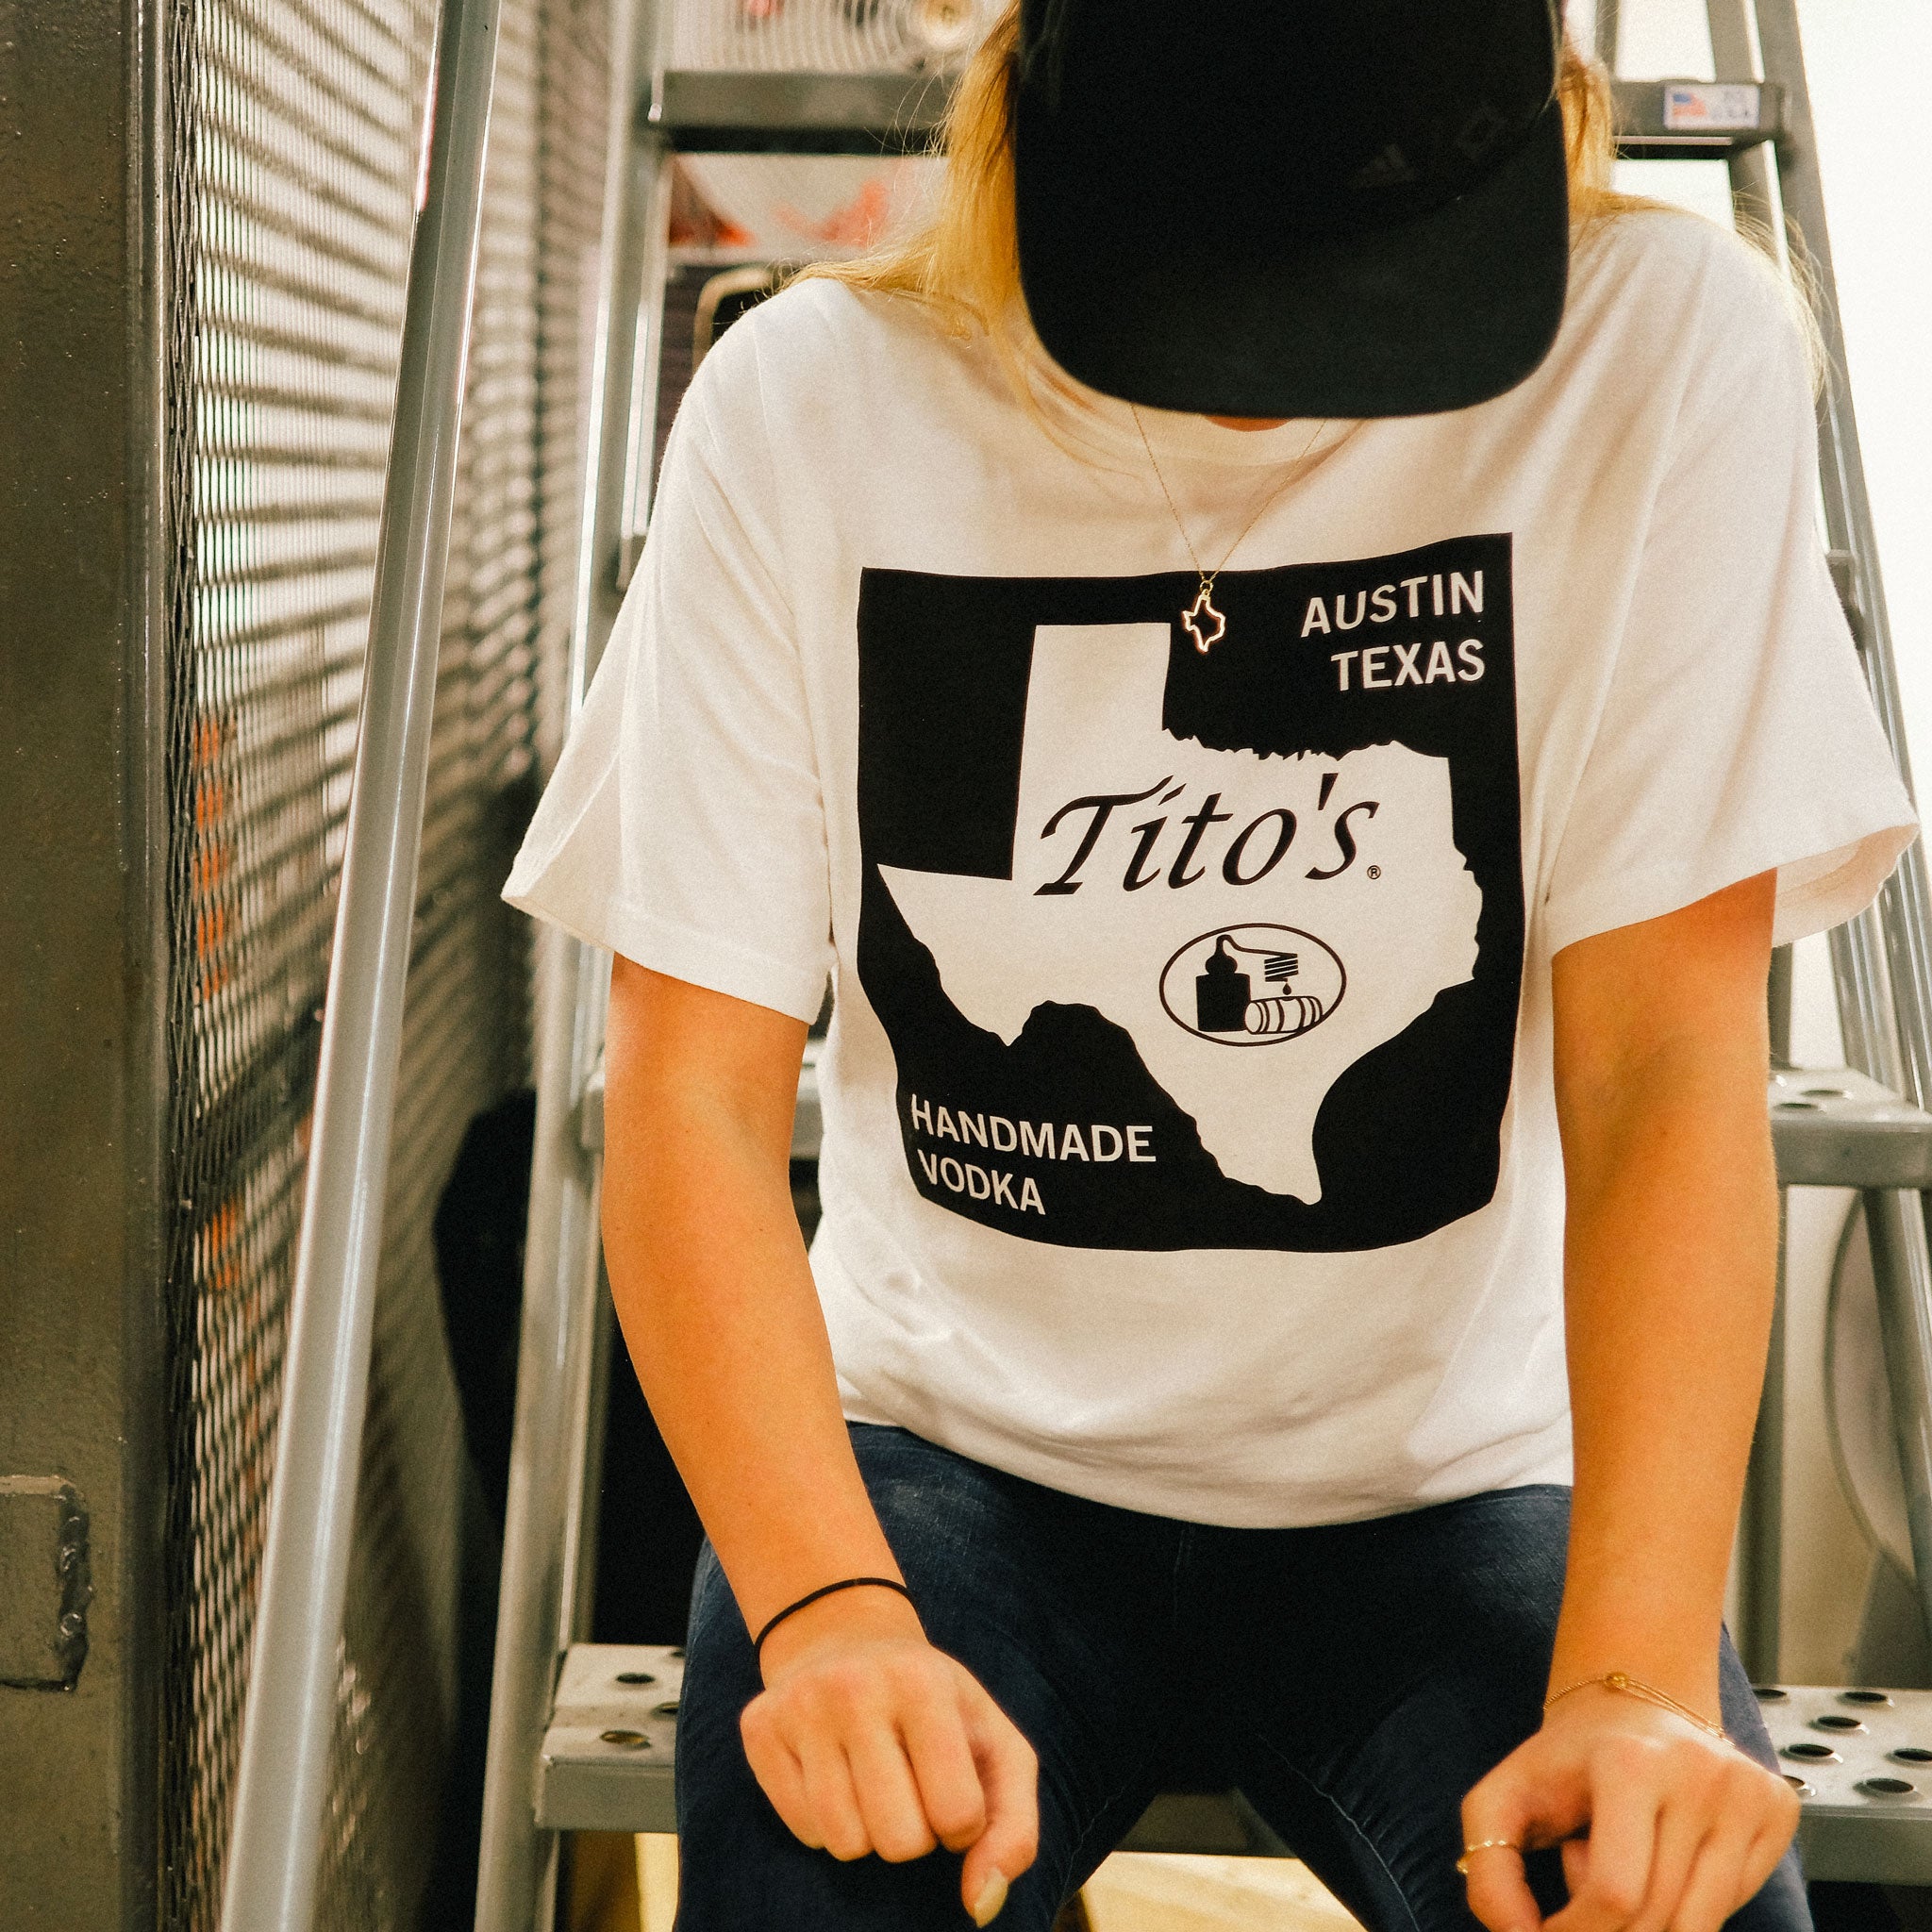 Girl sitting on stairs wearing white short-sleeve t-shirt featuring Texas state road sign design with Tito's Handmade Vodka mark